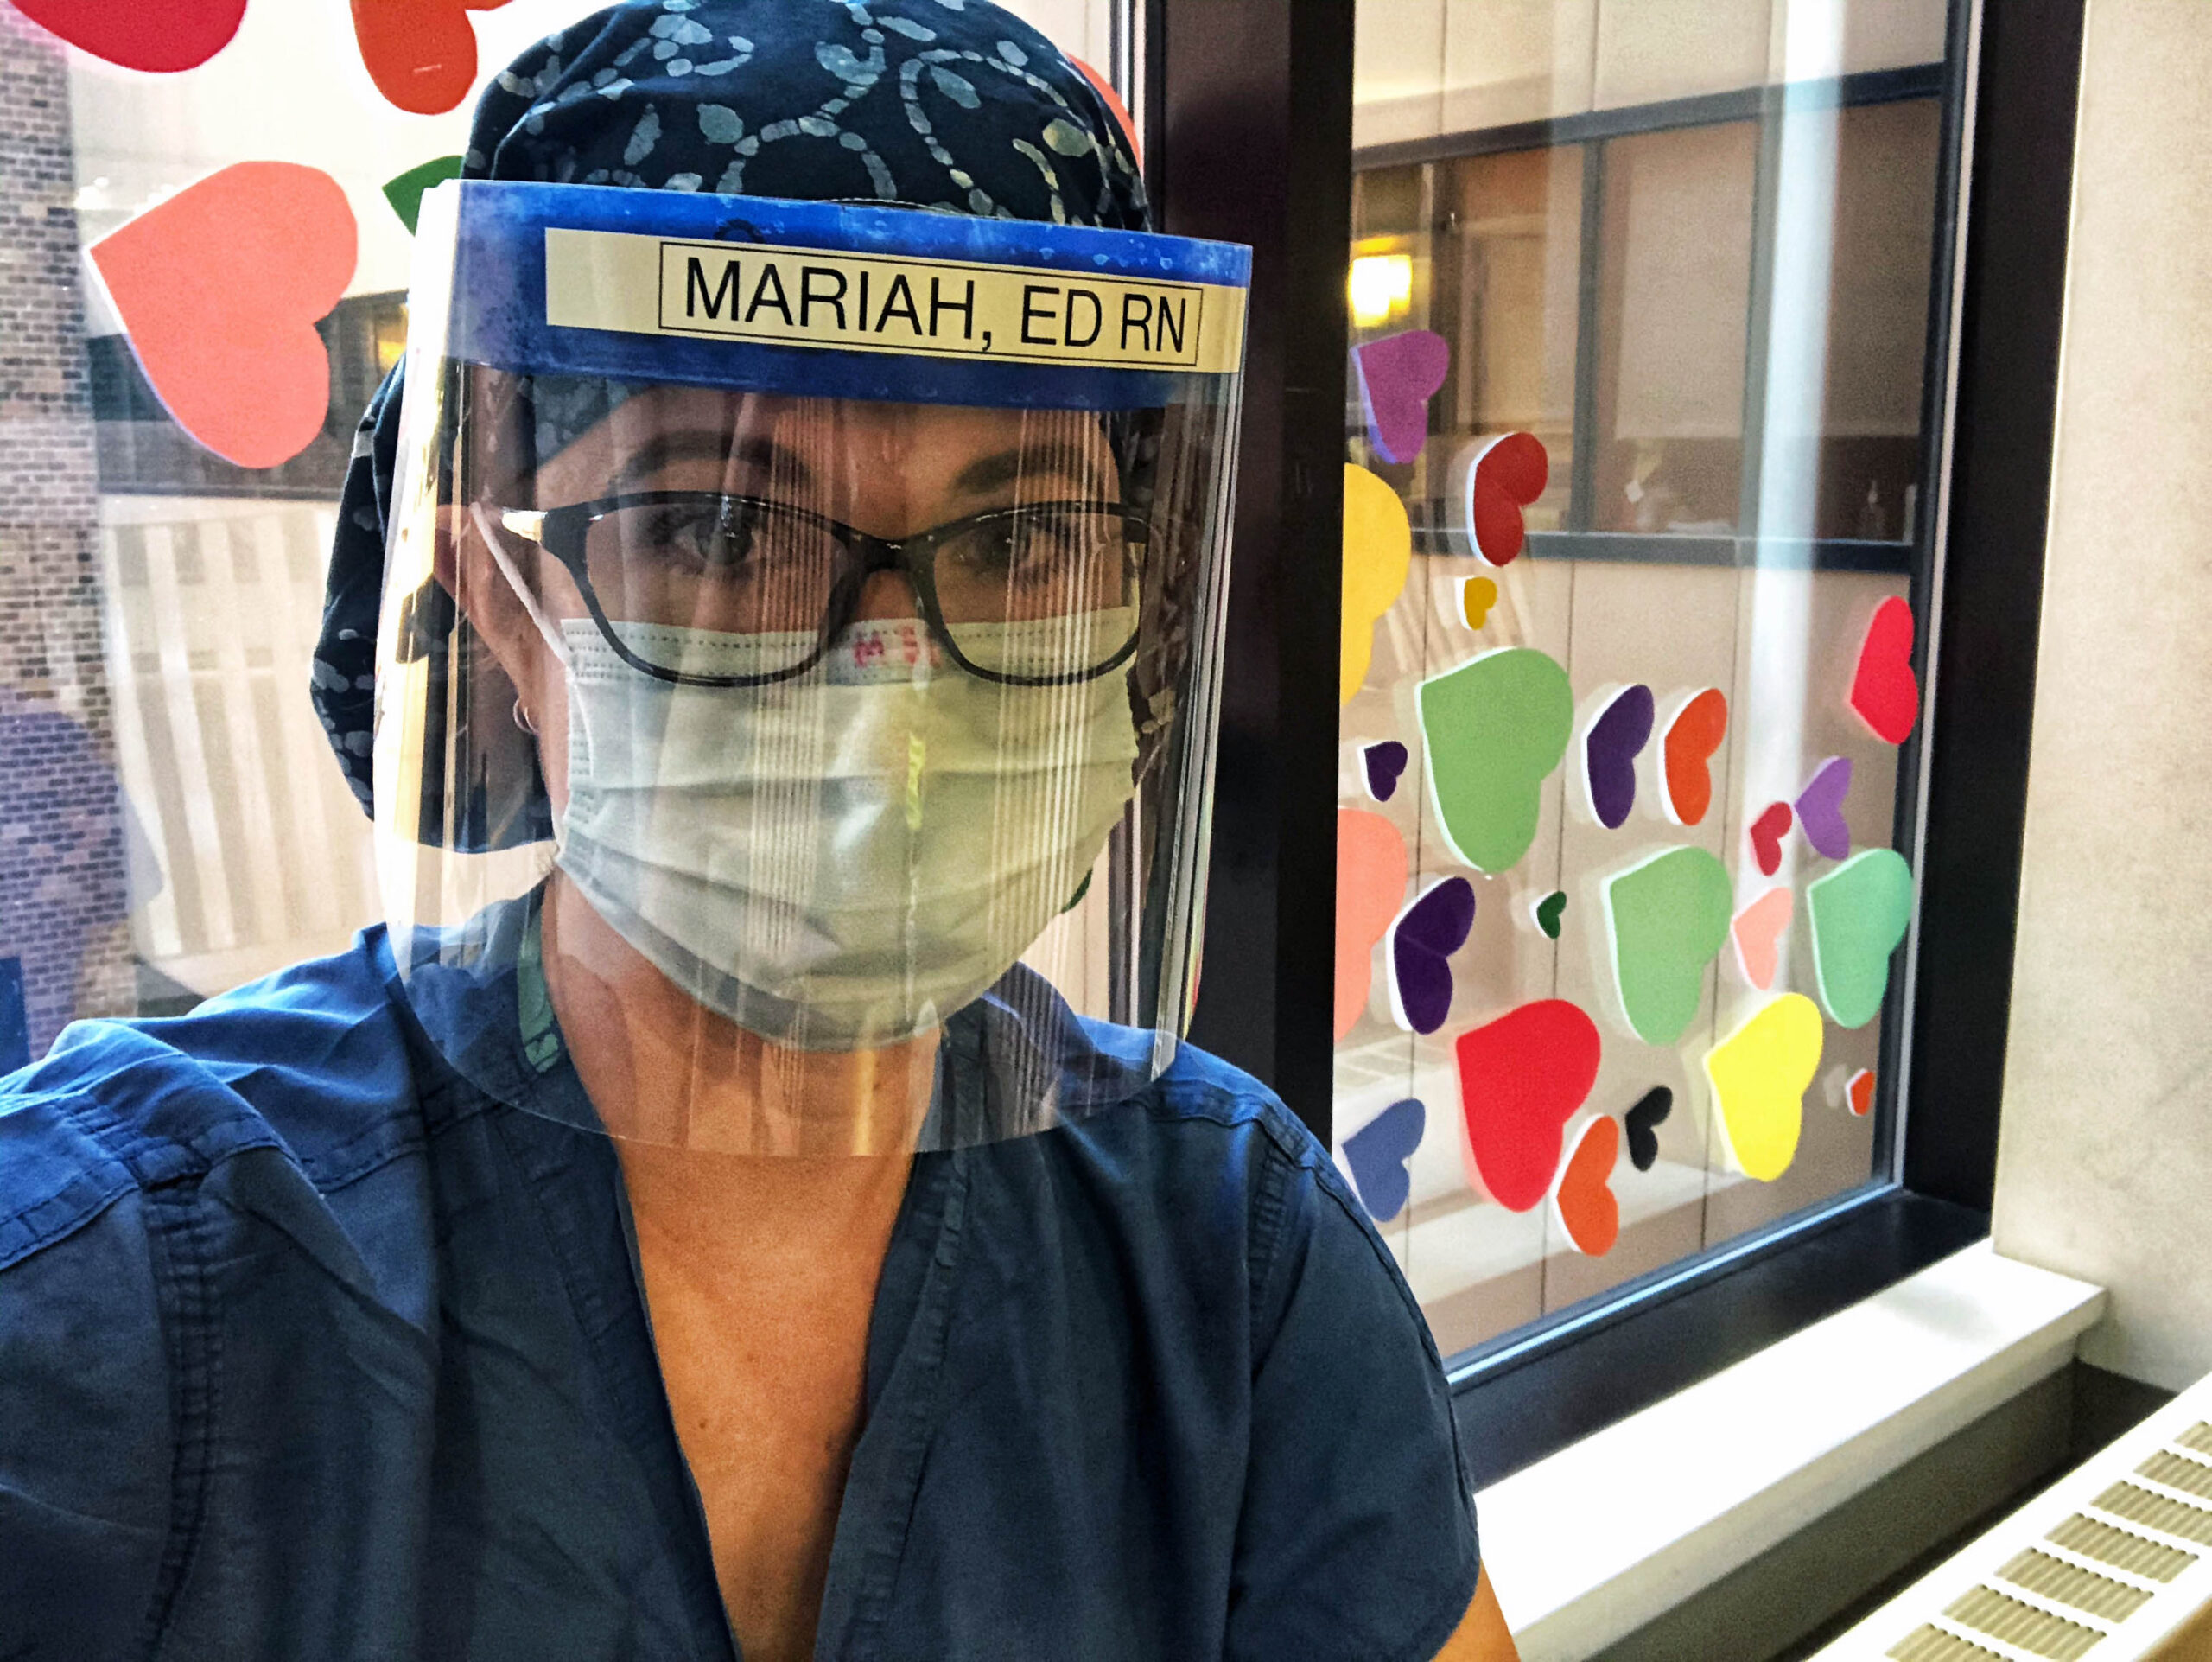 Mariah Clark, an emergency room nurse who has worked at University of Wisconsin Hospital for 12 years, wears personal protective equipment